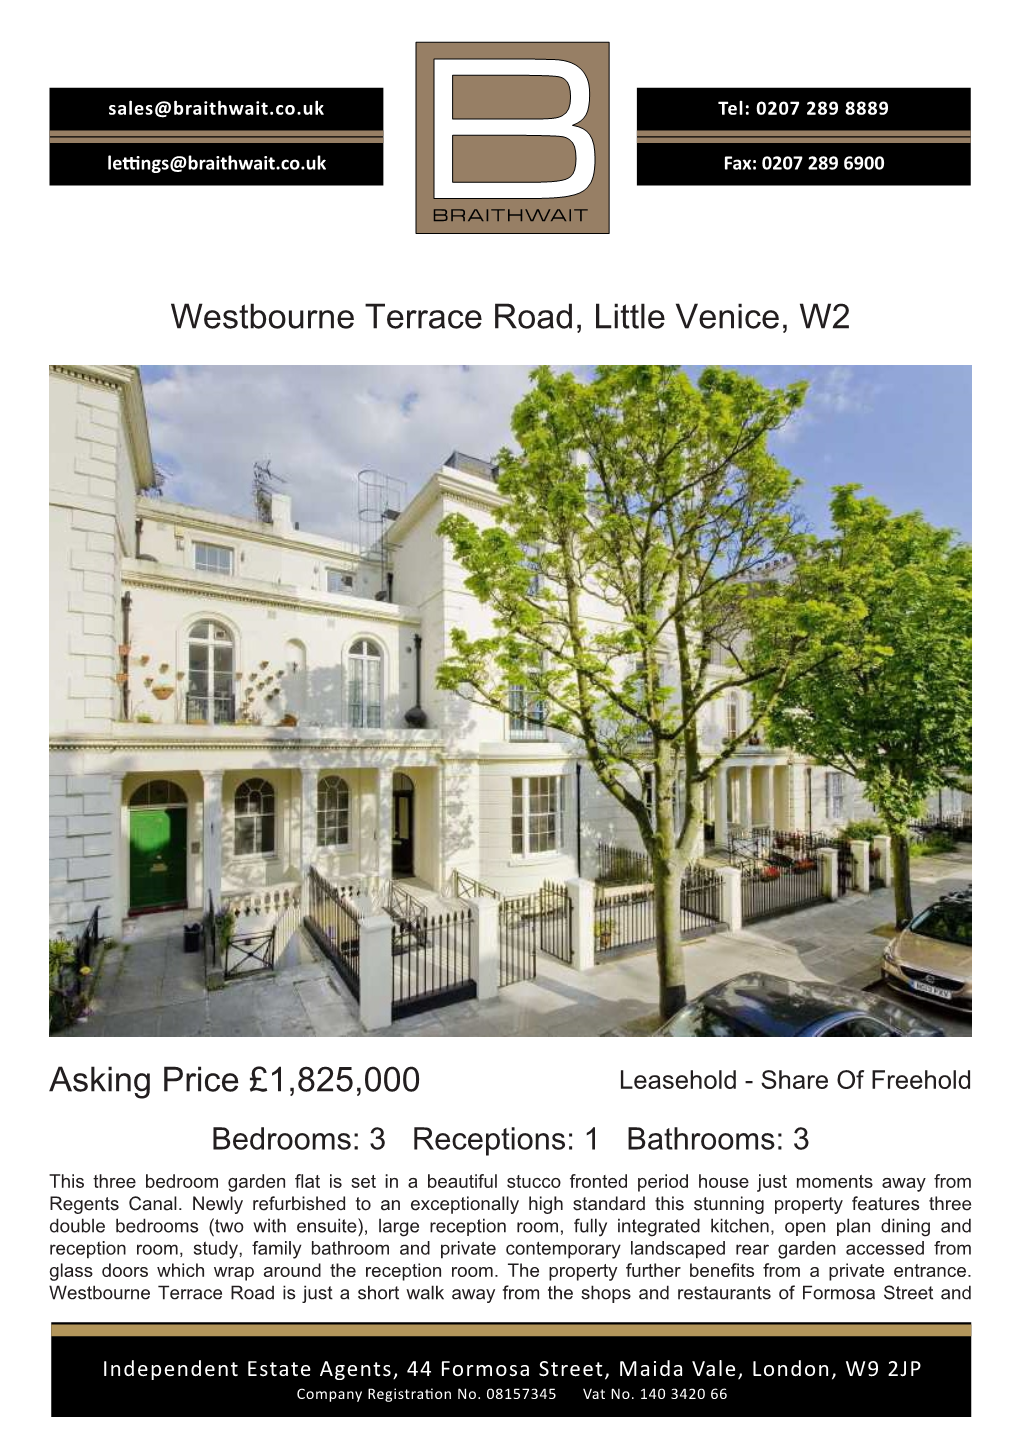 Westbourne Terrace Road, Little Venice, W2 Asking Price £1,825,000